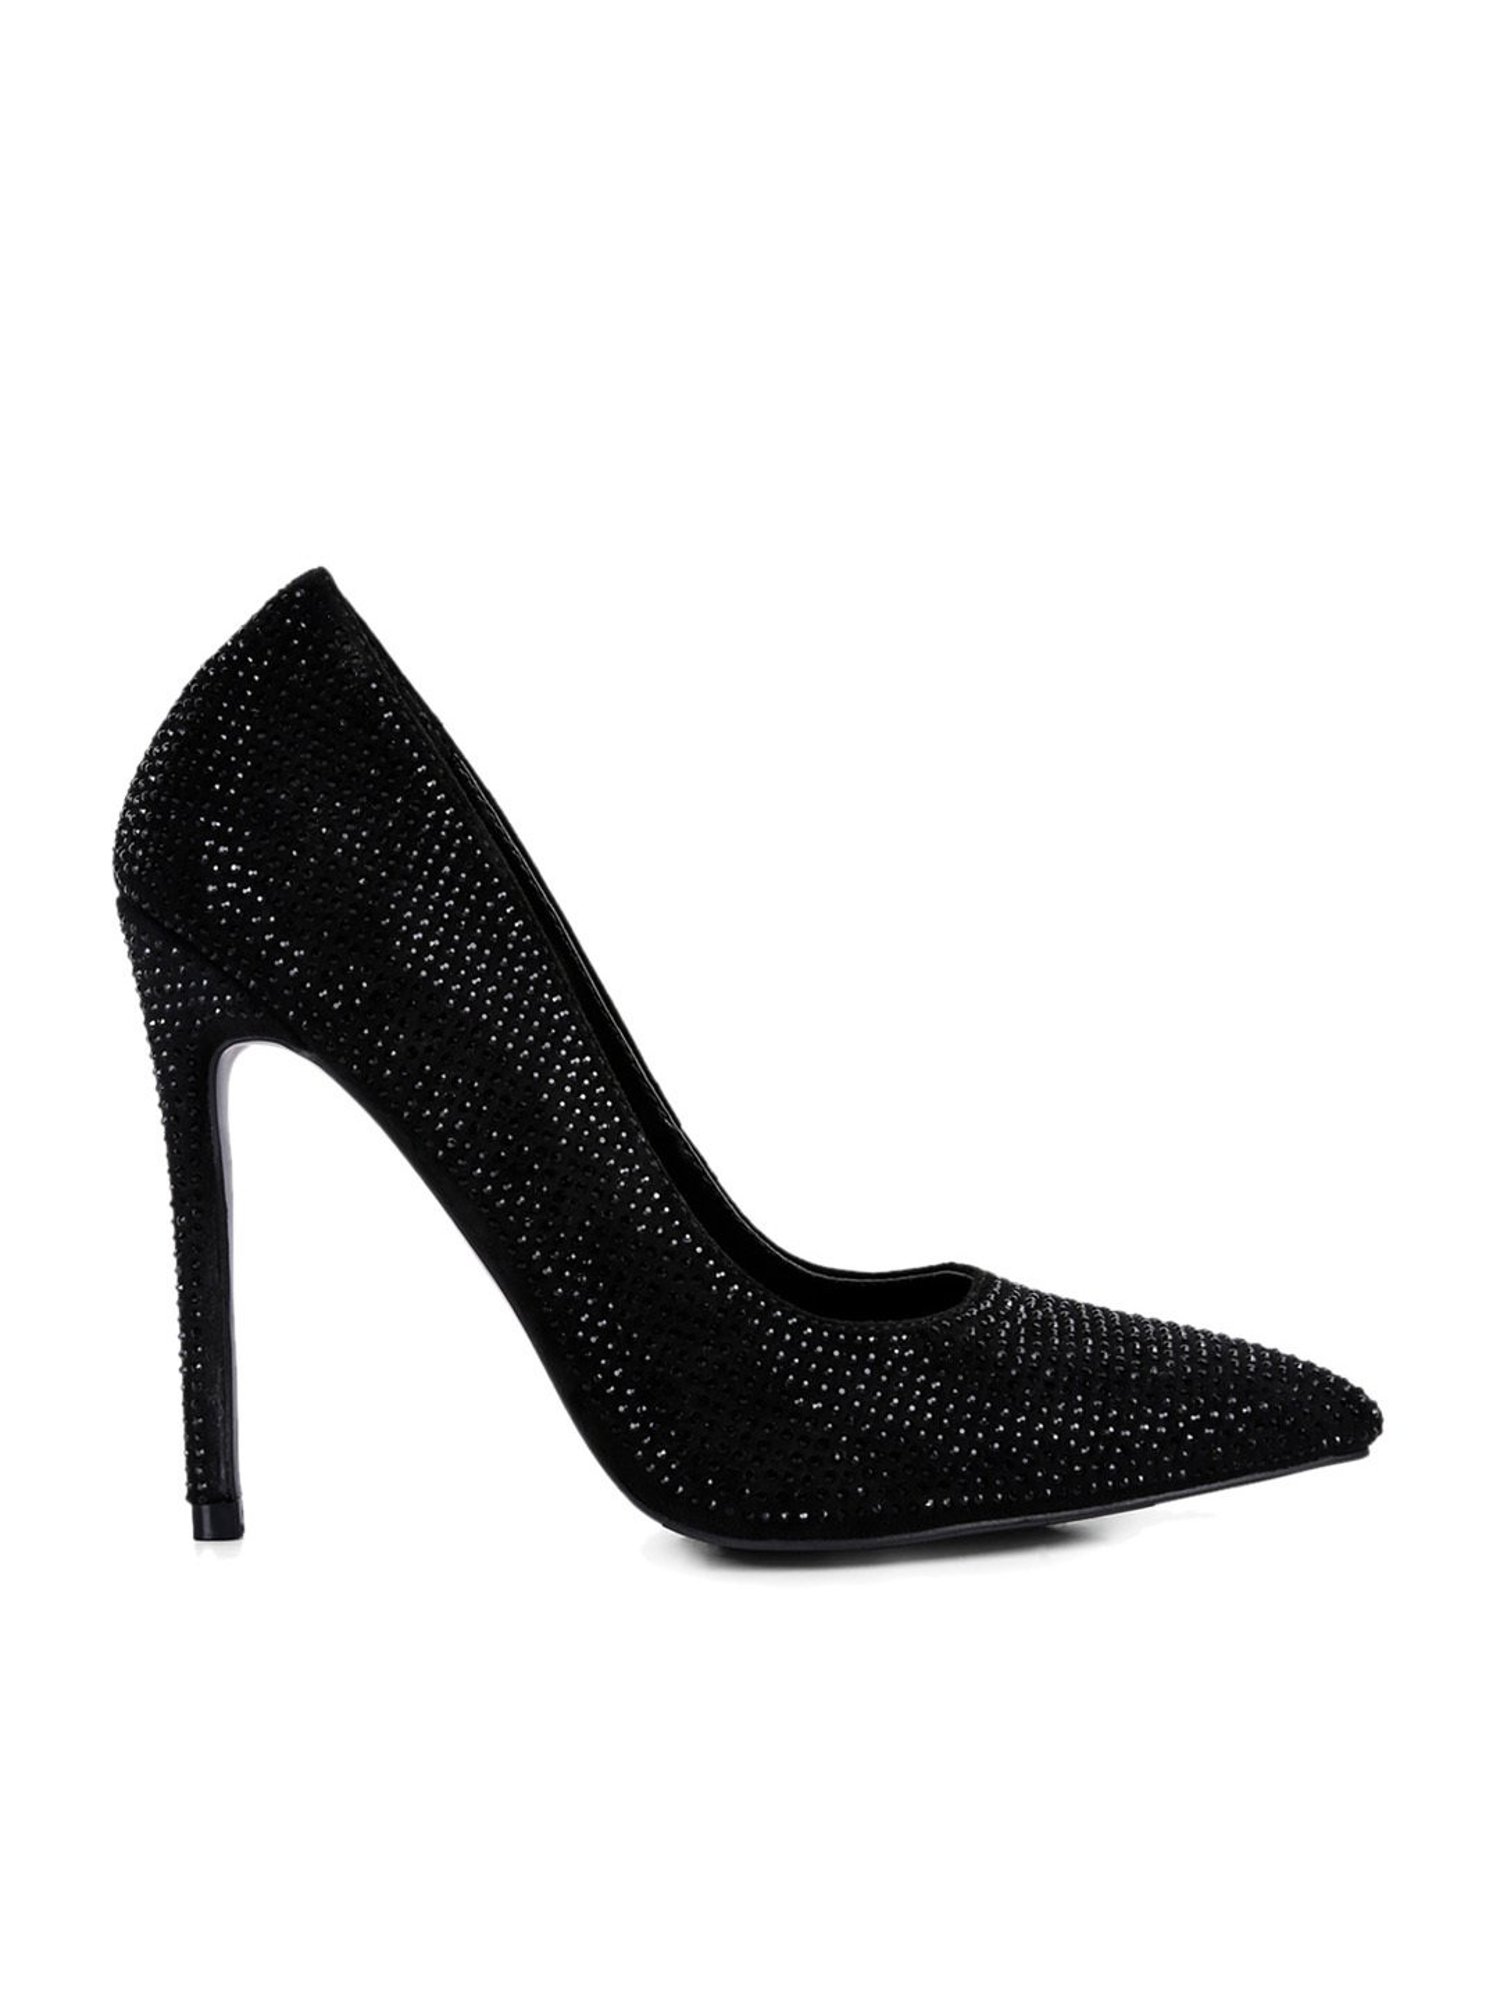 Amazon.com | RUBRICA Glitter Heels for Women Chunky Heel Closed Toe 4 inch  Stiletto Pumps Thick Heel Big Size 4.5-13 (Black, us_Footwear_Size_System,  Adult, Women, Numeric, Medium, Numeric_4_Point_5) | Shoes